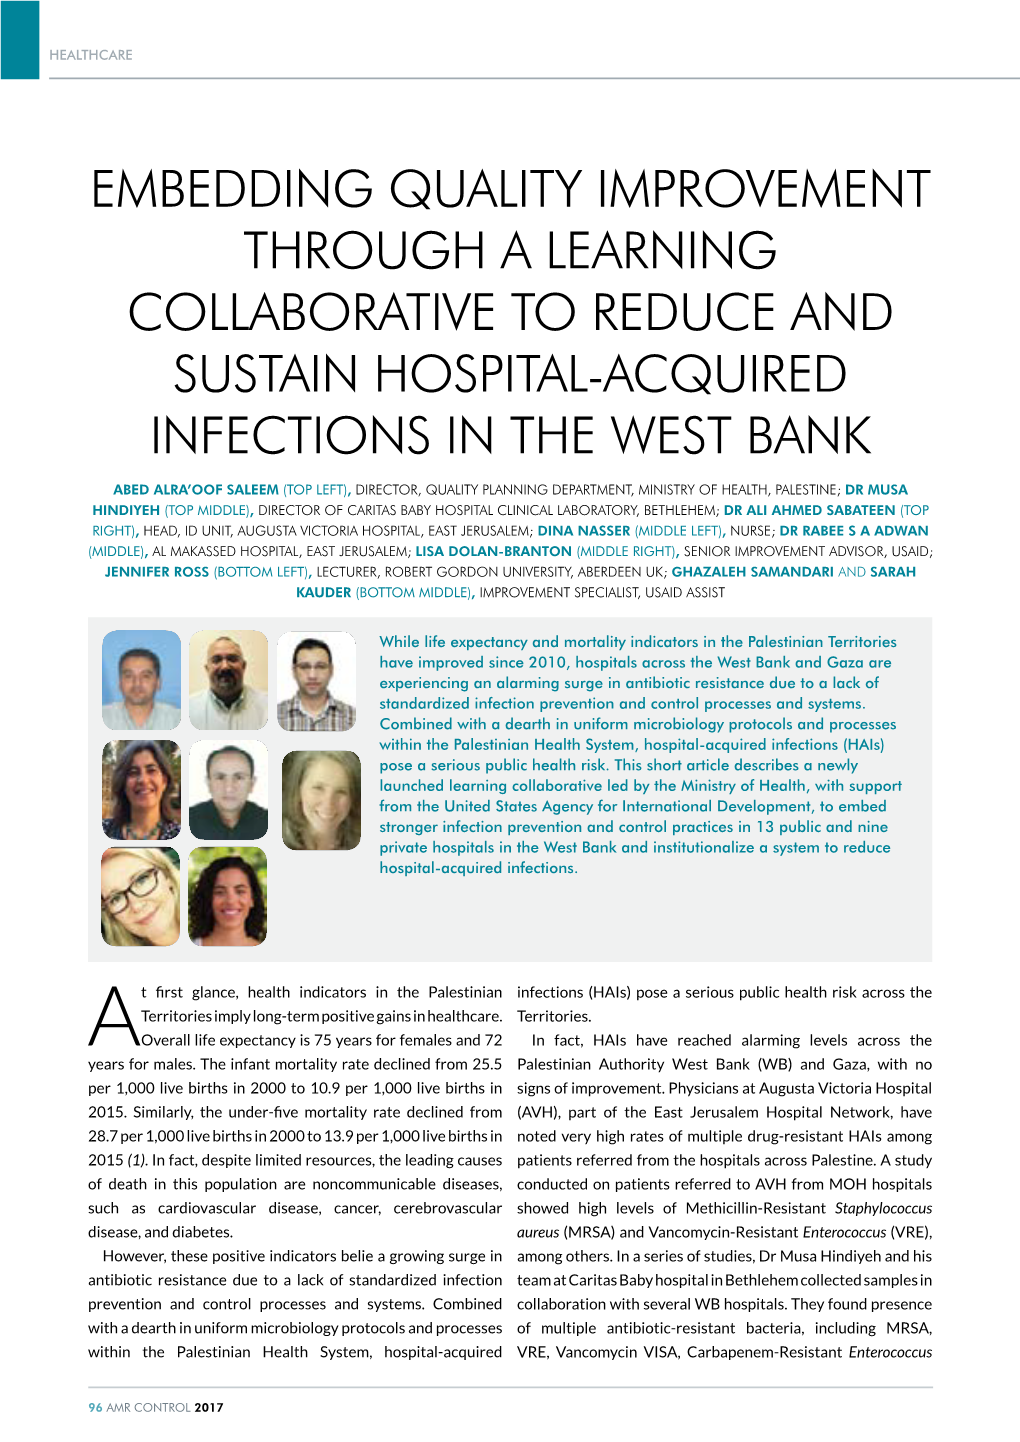 Embedding Quality Improvement Through a Learning Collaborative to Reduce and Sustain Hospital-Acquired Infections in the West Bank